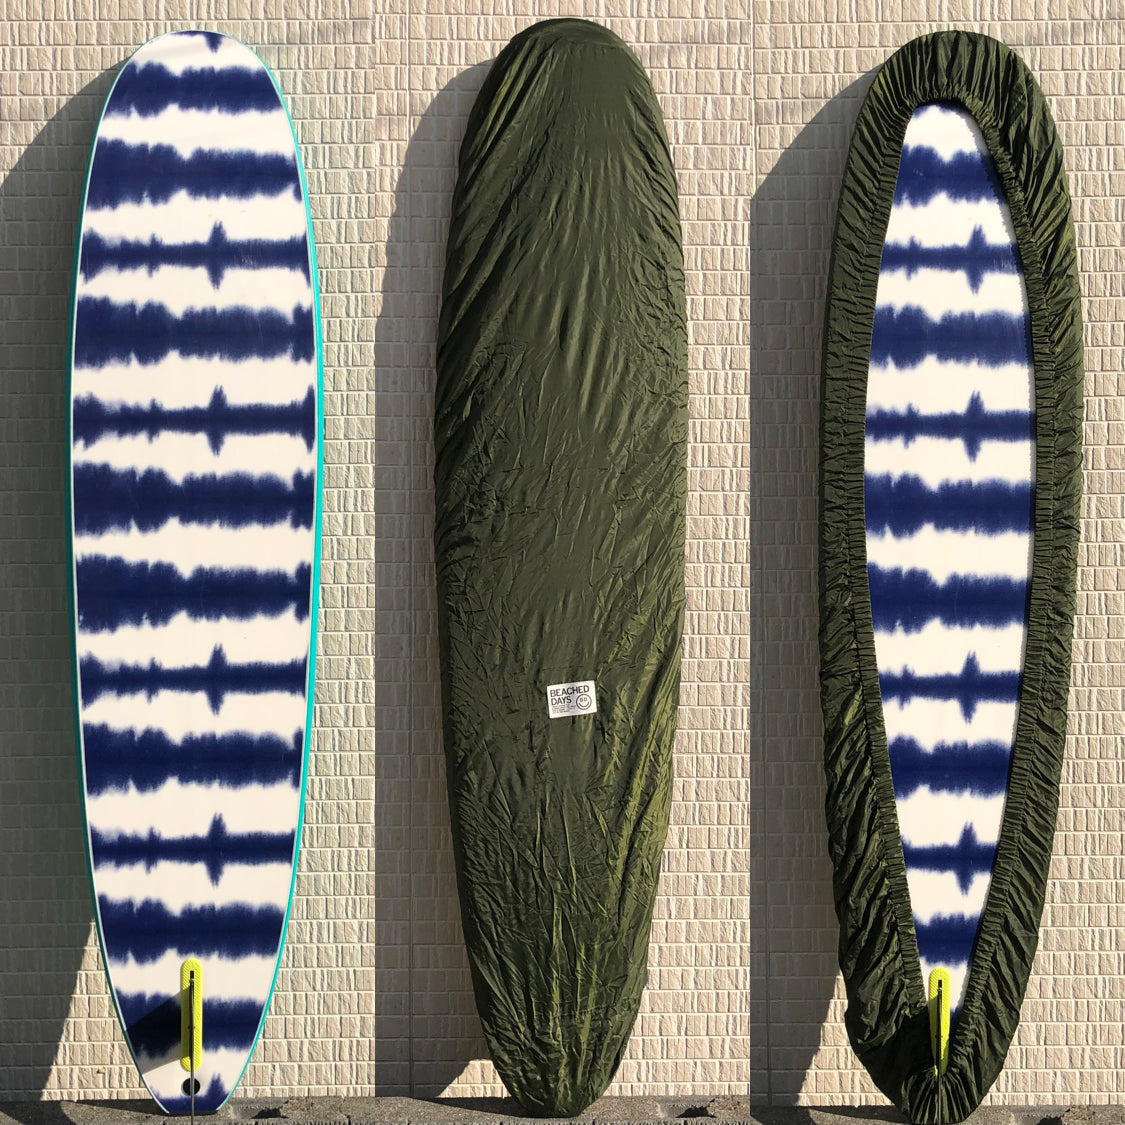 6'7-8'4ft Mid Length Deck Cover